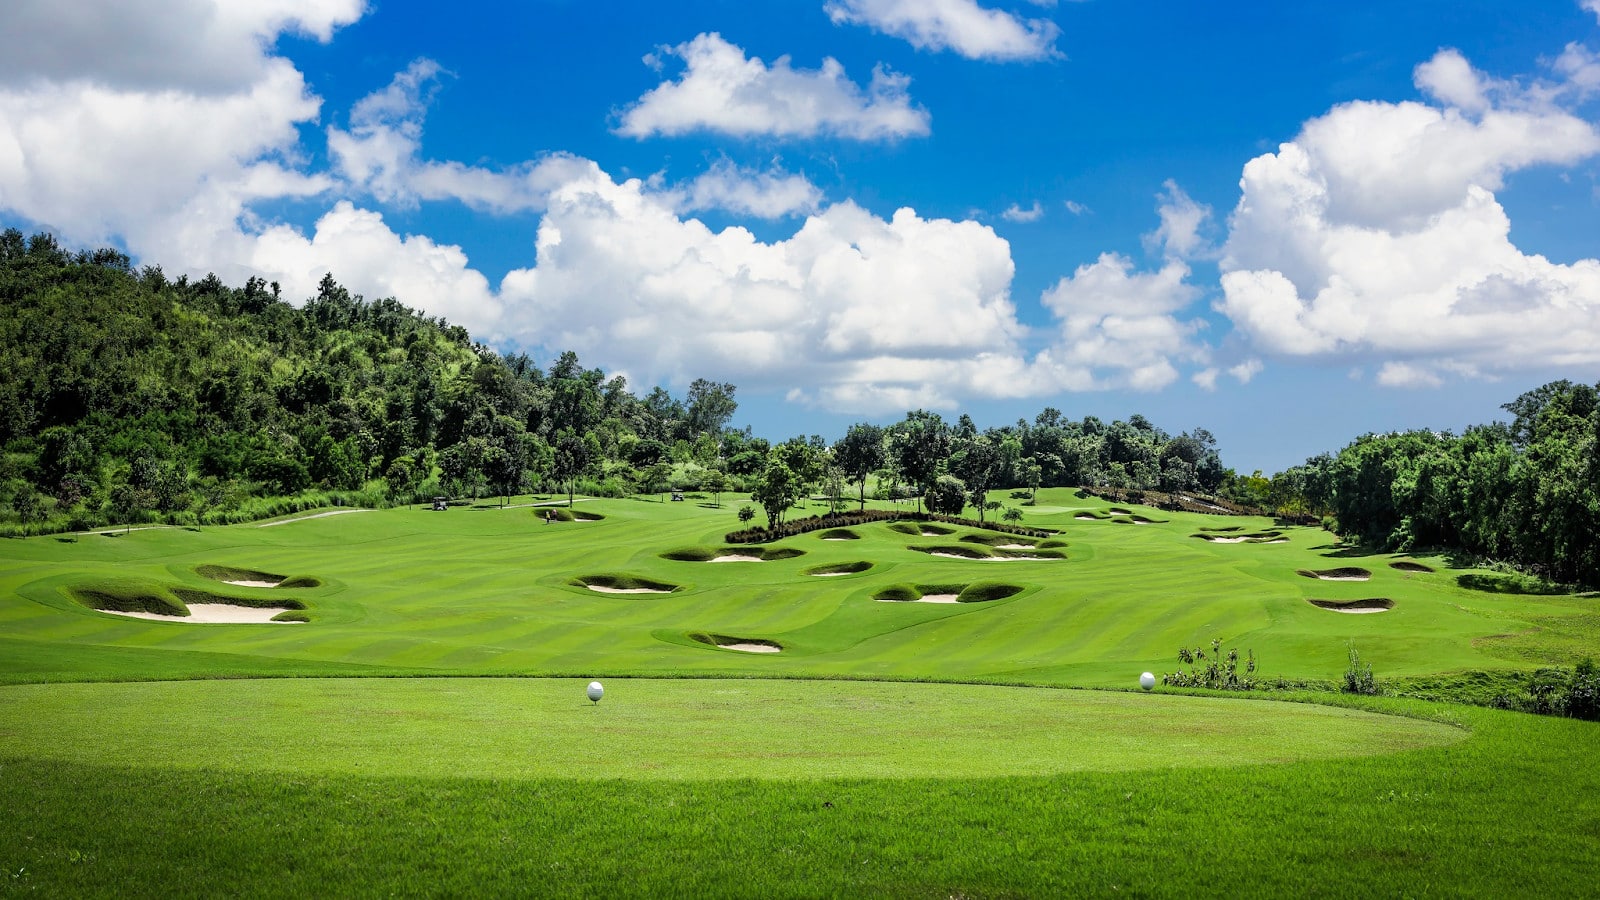 The oldest golf course  in Pattaya